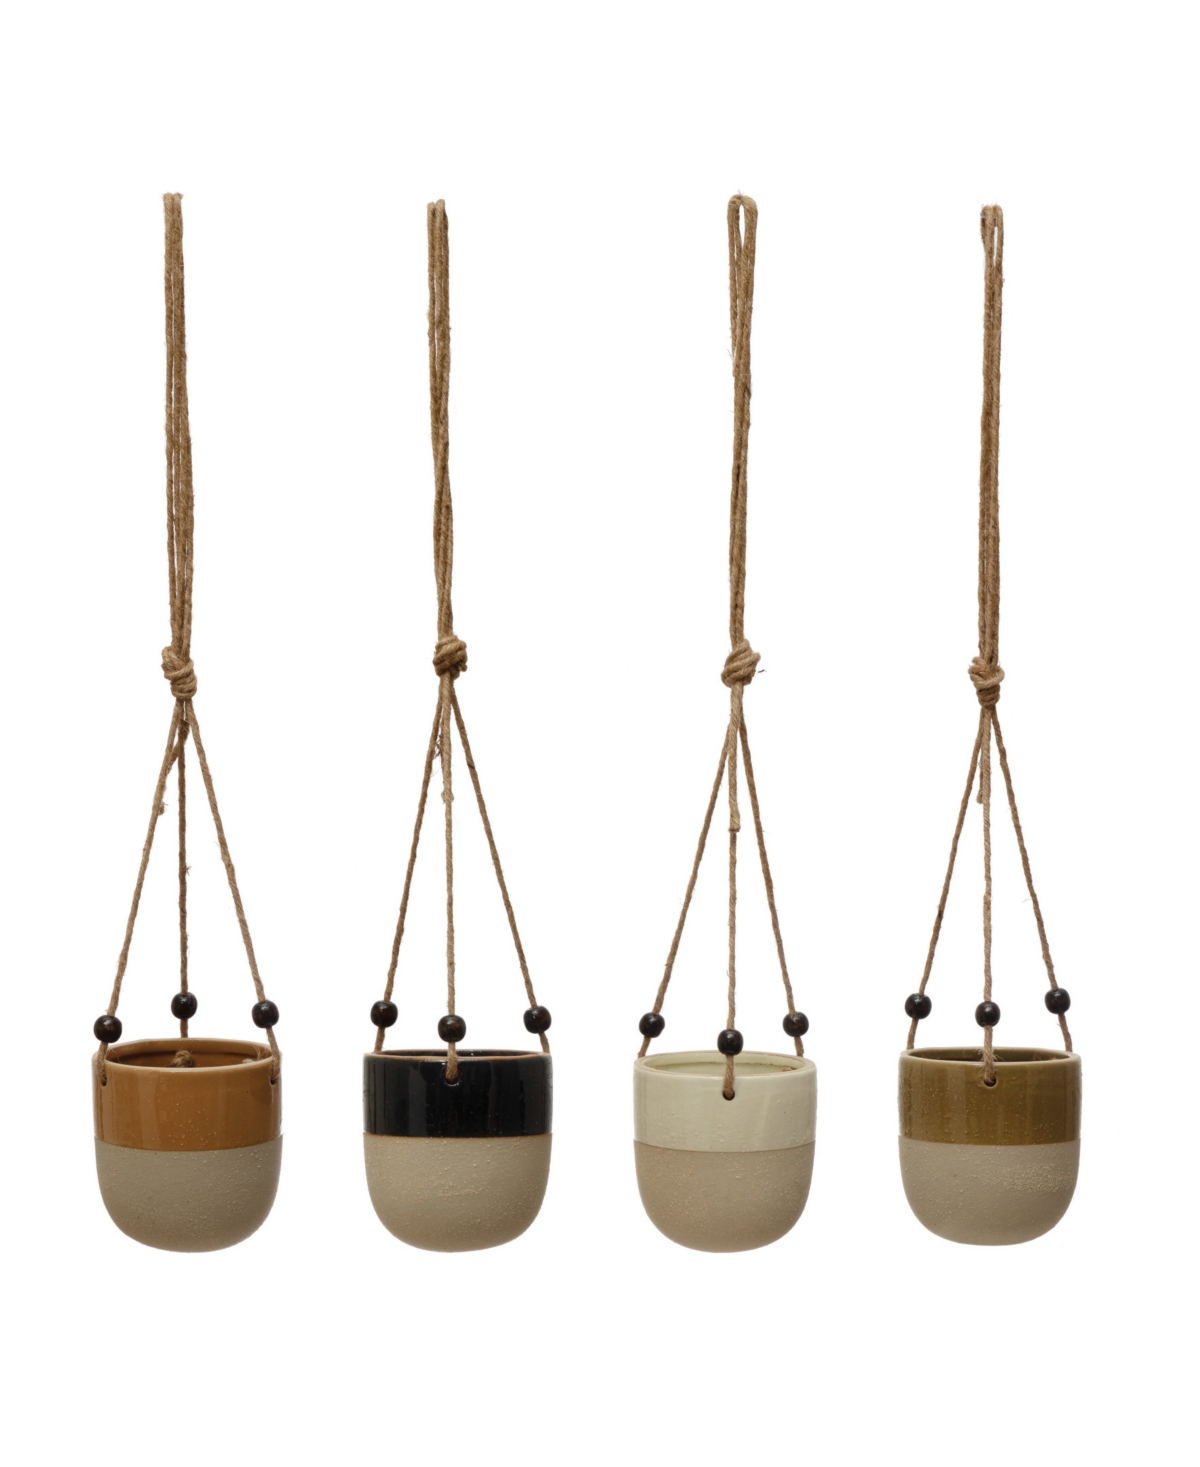 Set of 4, 4.5" H Stoneware Planter with Bead Hanger, 4 Styles - Multicolored